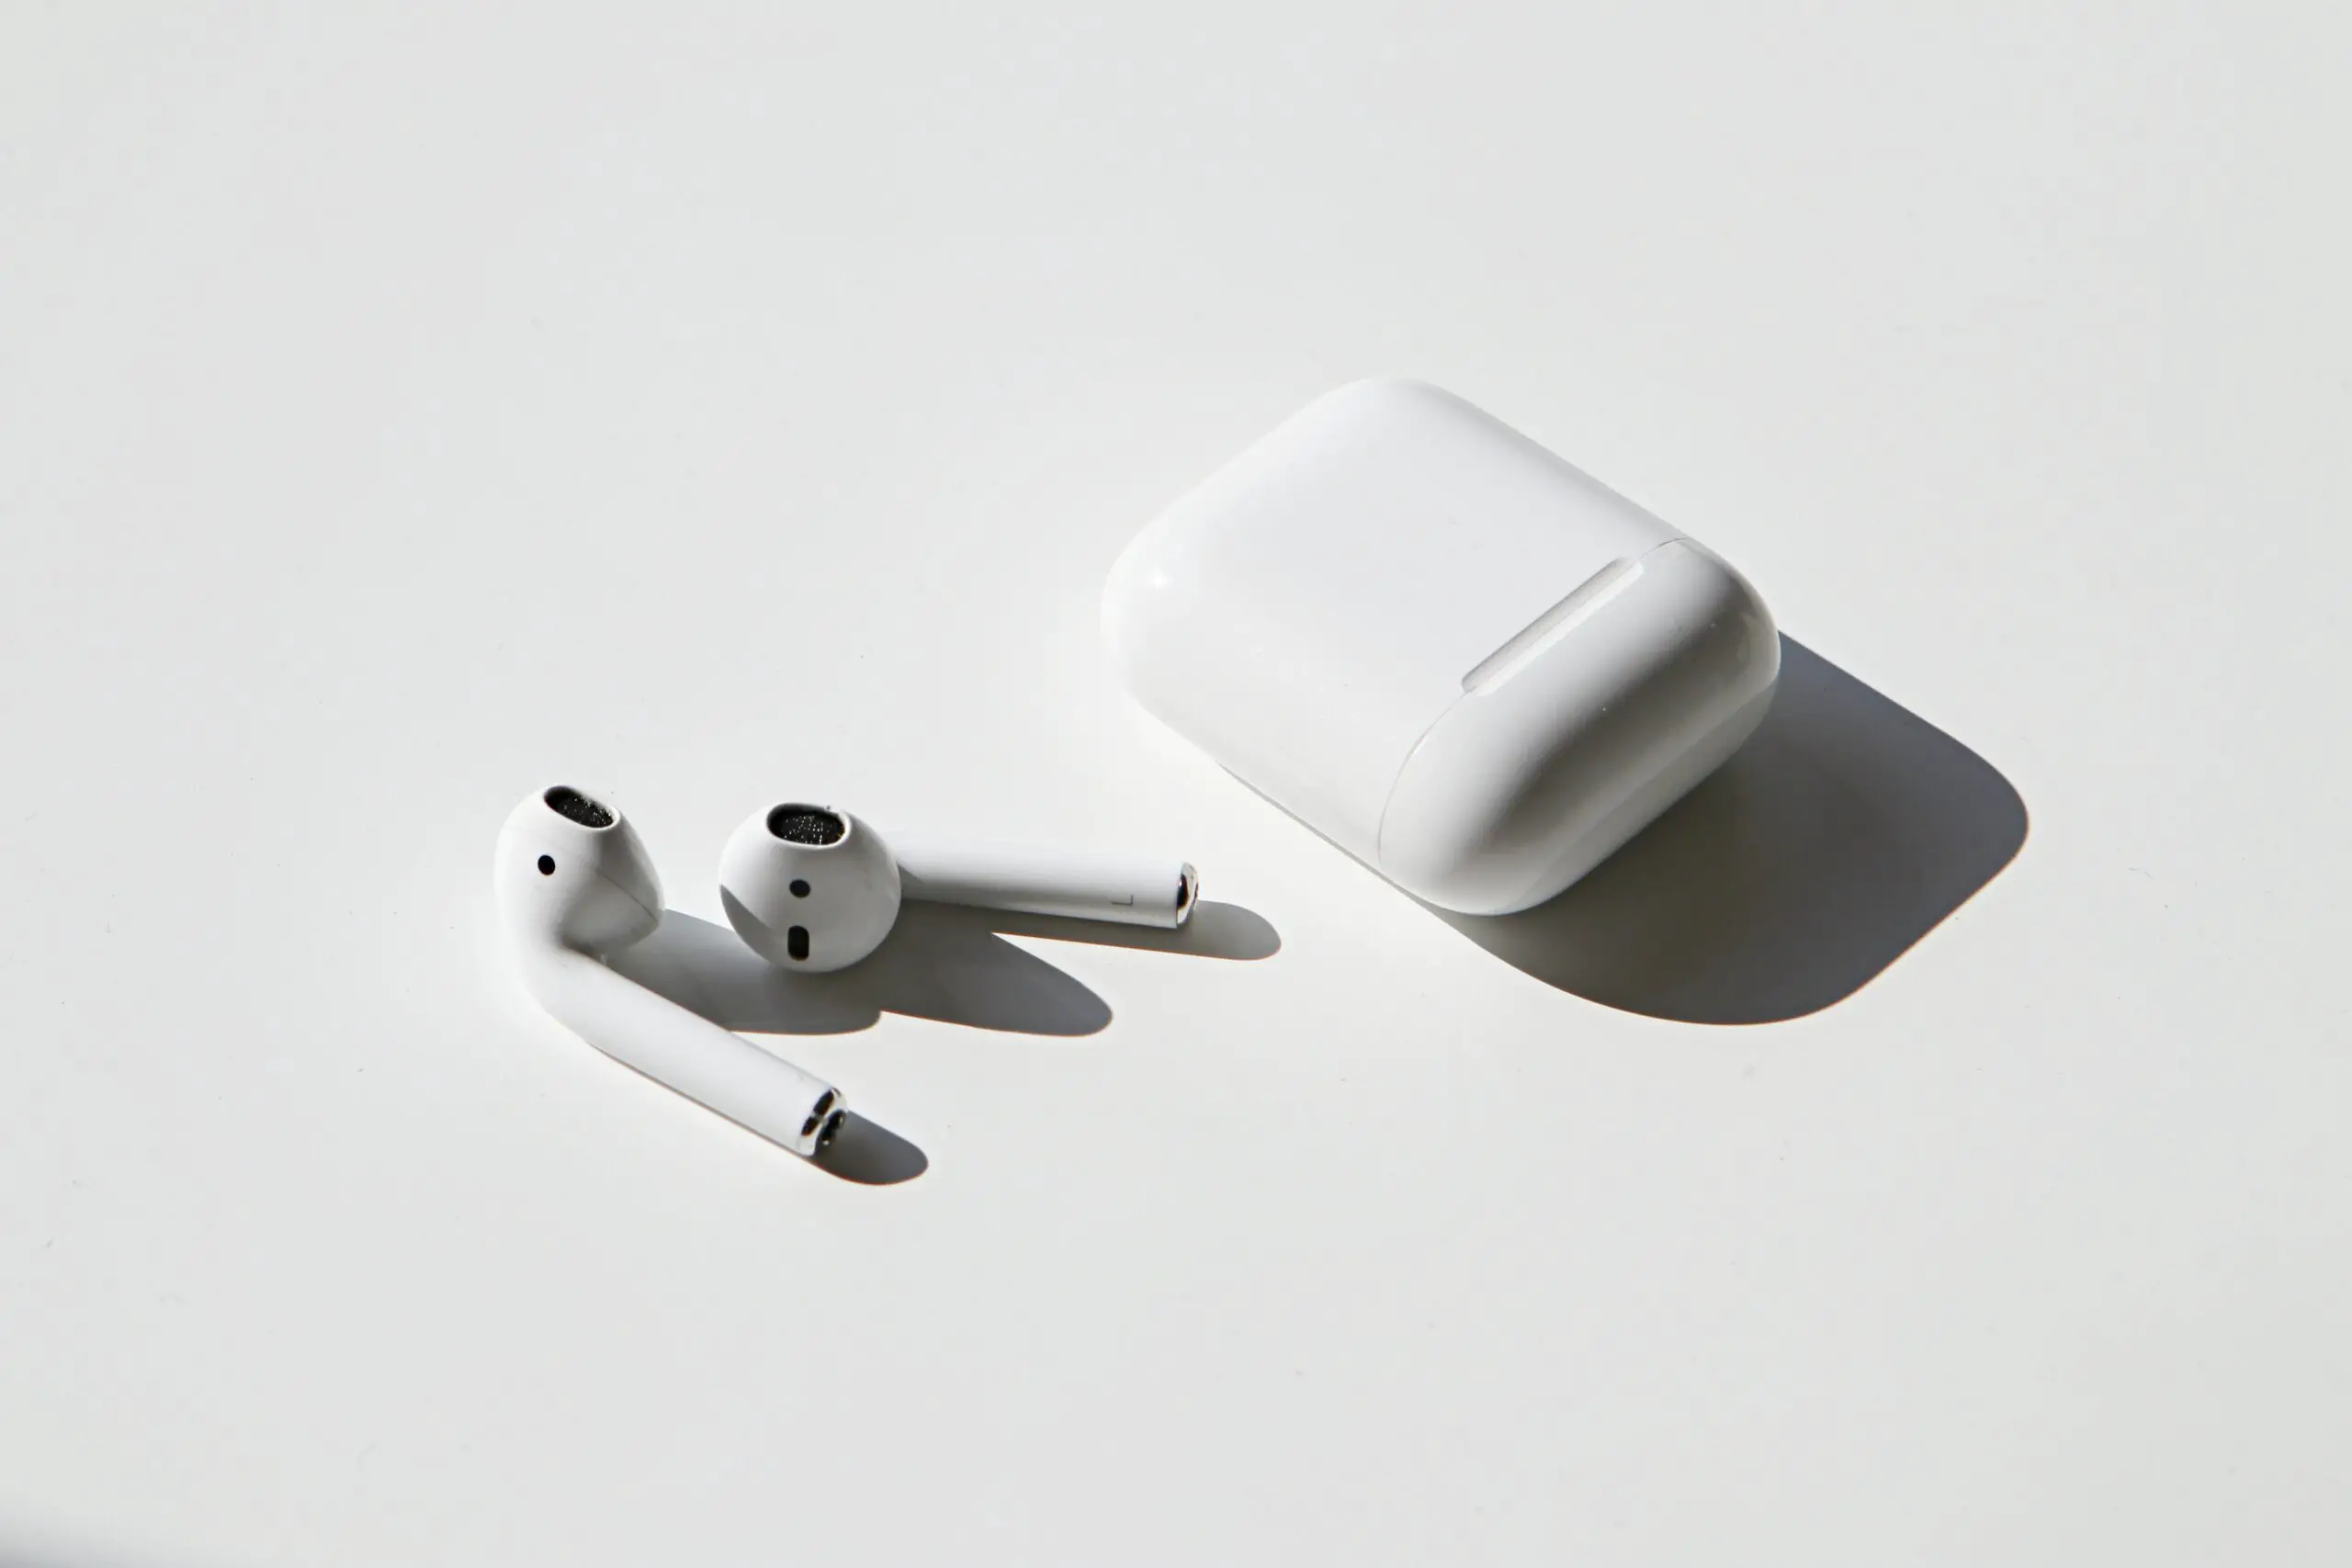 Why Are My Airpods Not Connecting?